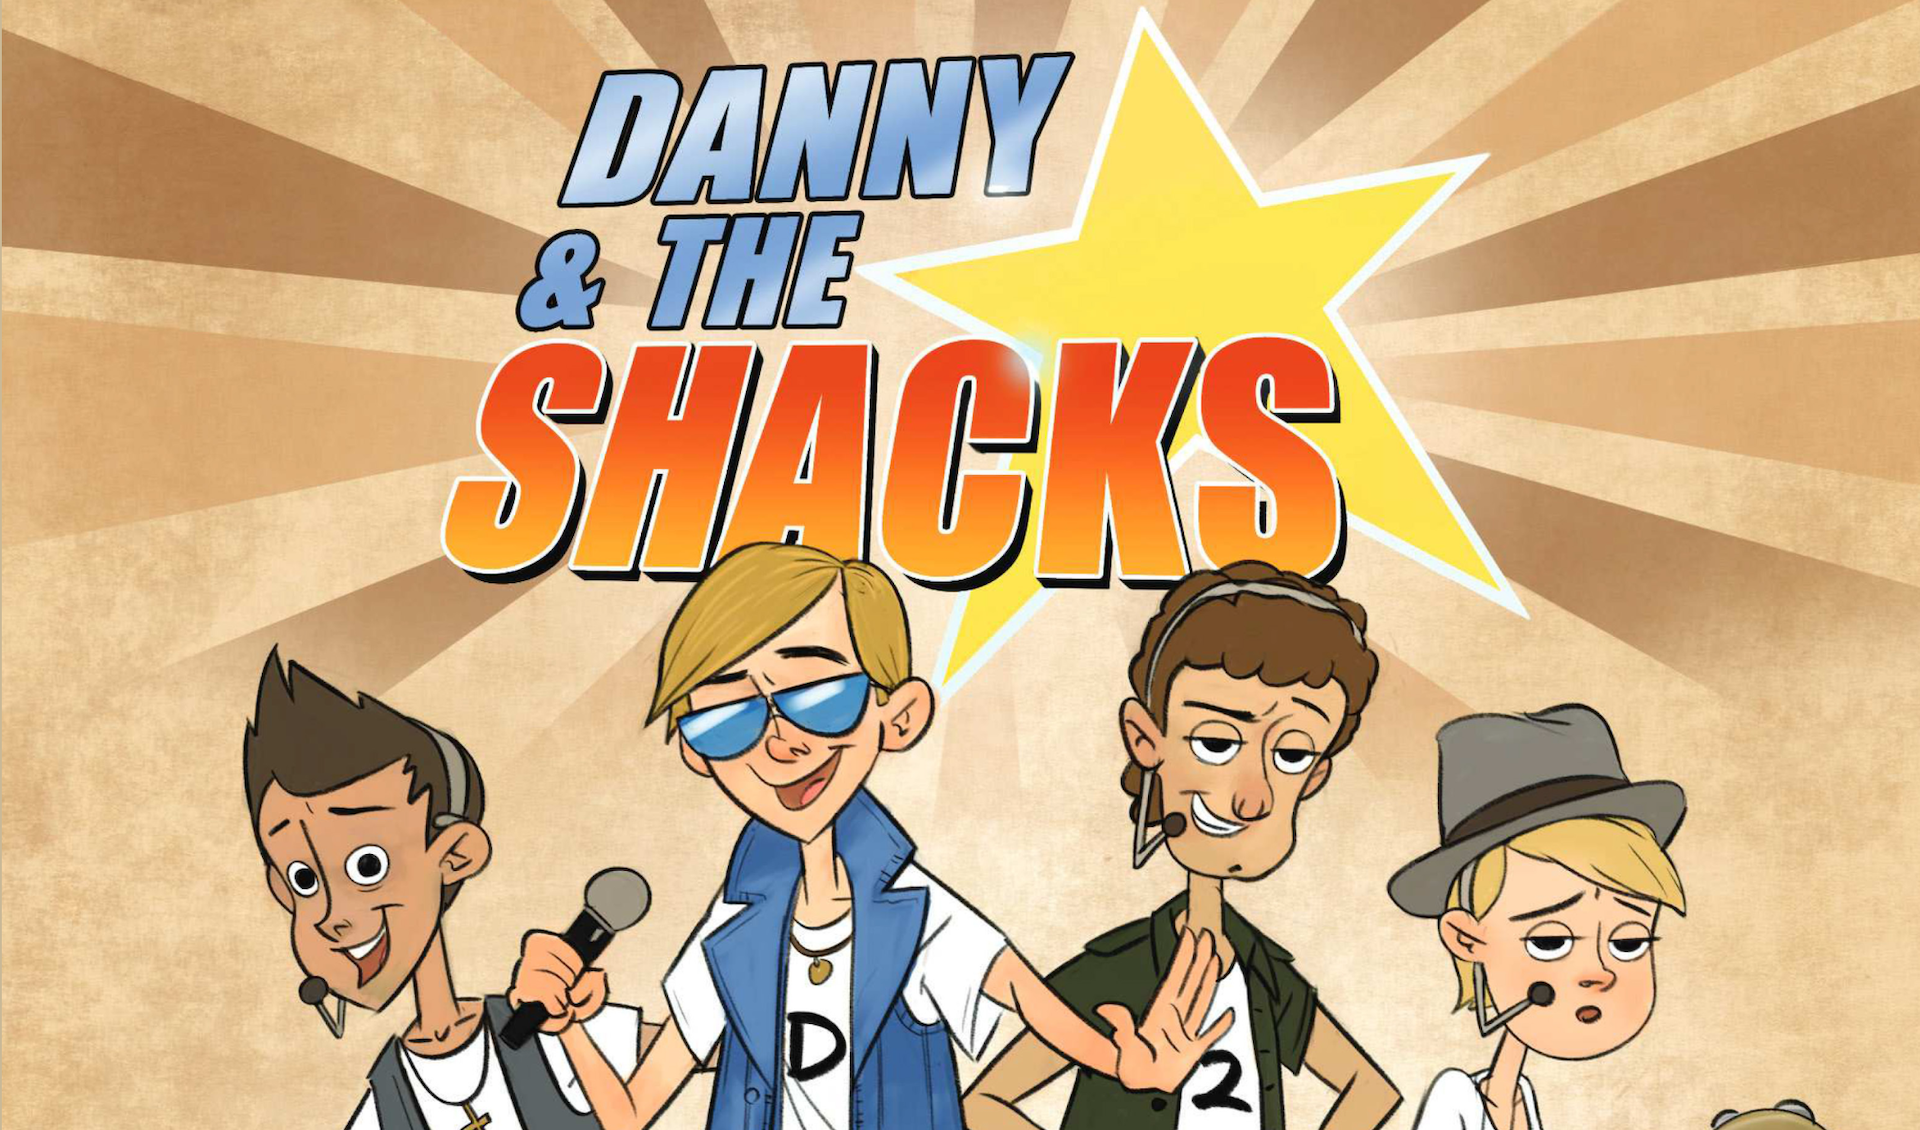 Danny and the Shacks